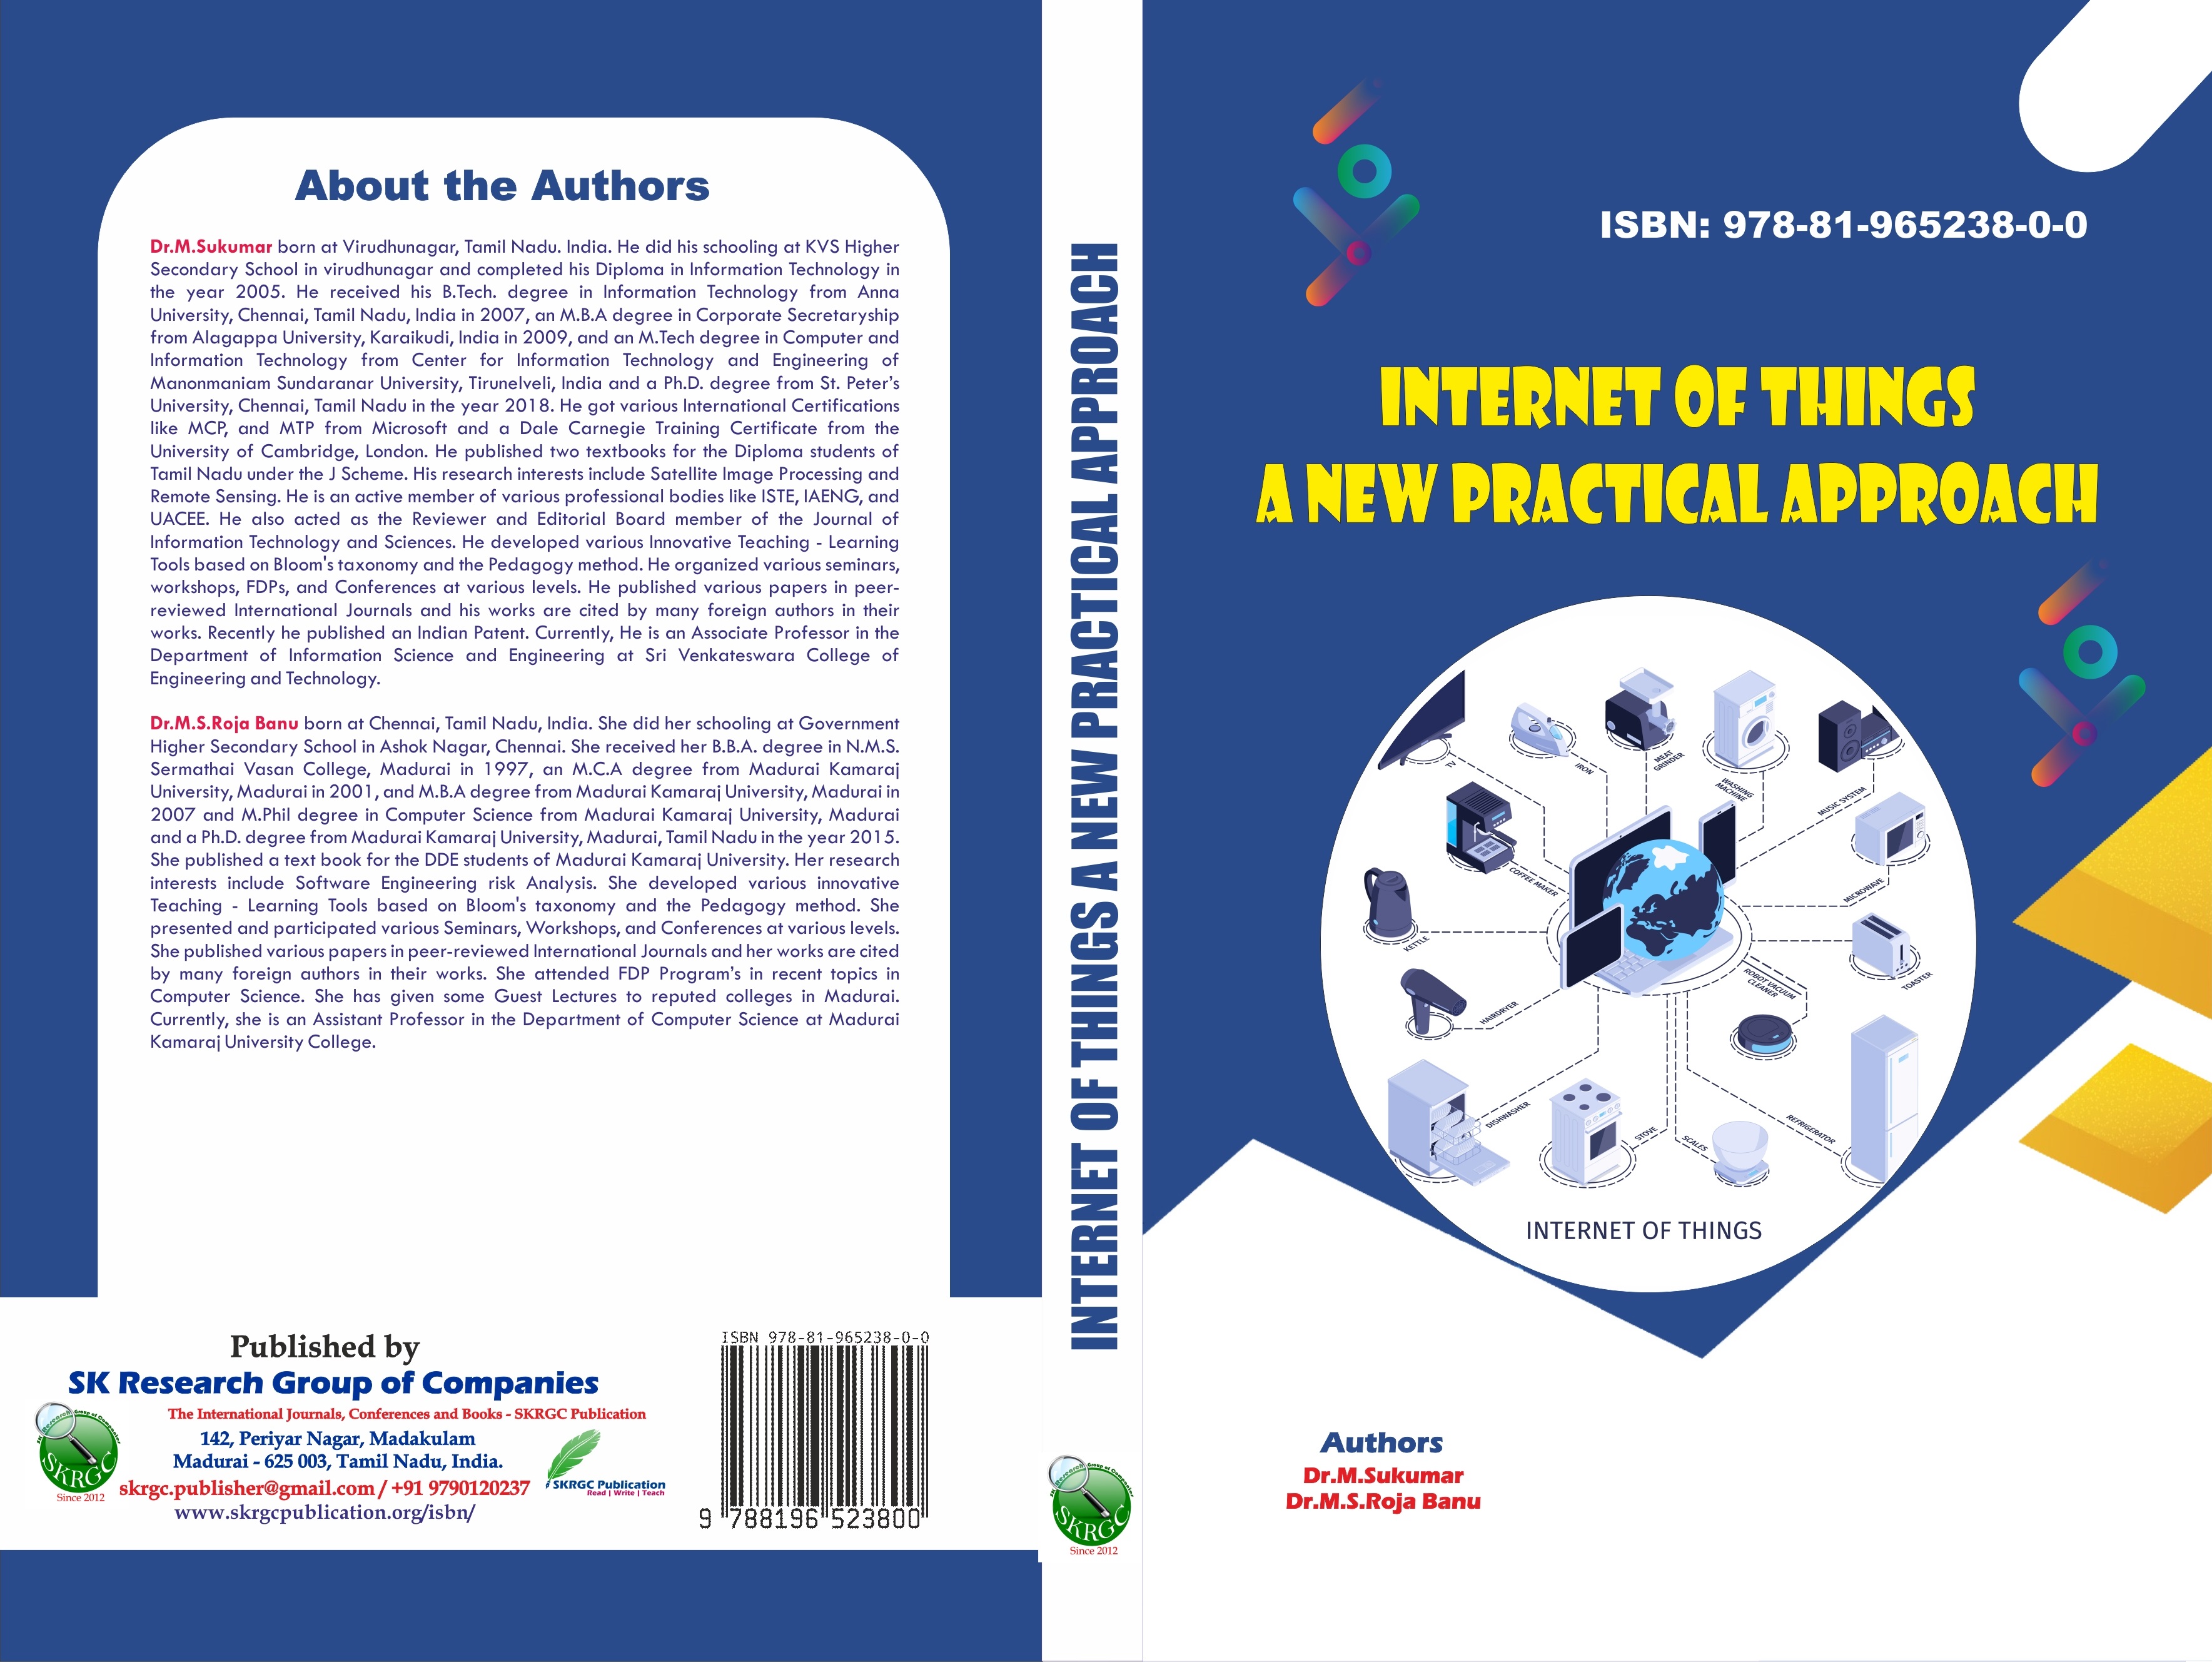 INTERNET OF THINGS A NEW PRACTICAL APPROACH